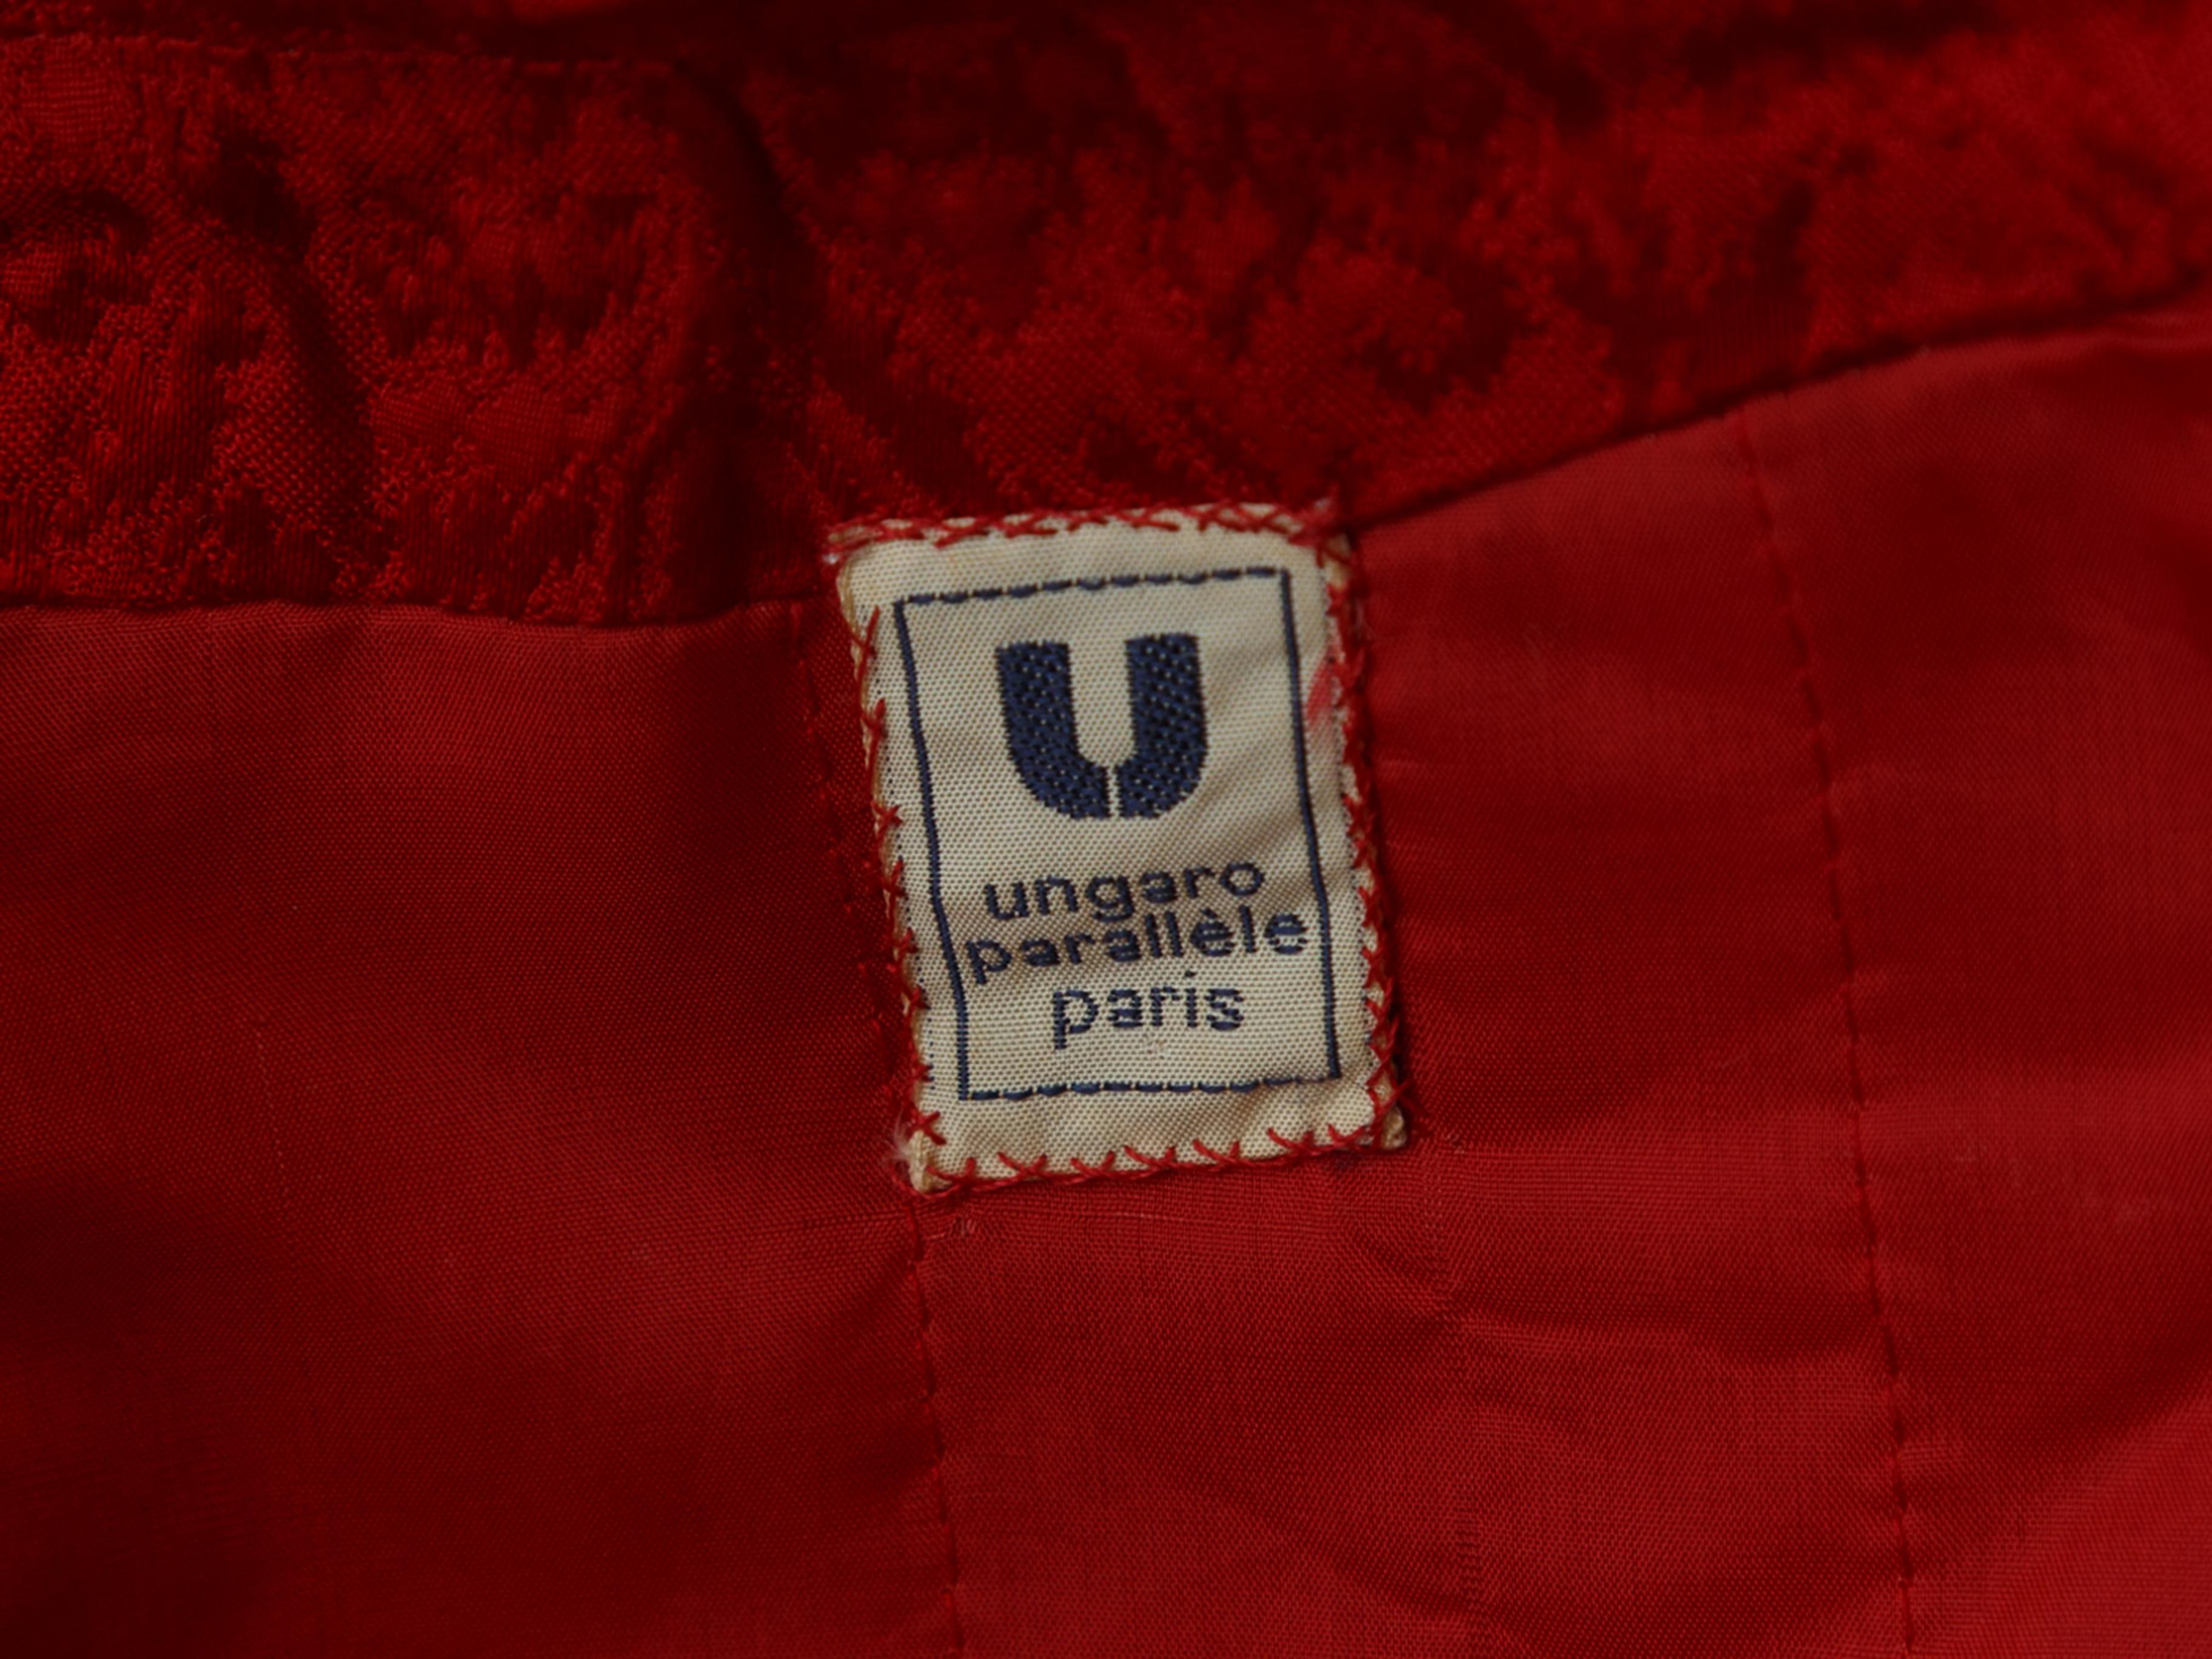 Product details: Vintage red silk brocade long coat by Ungaro. Mock neck. Tonal stitching throughout. Toggle button closures at front. 45